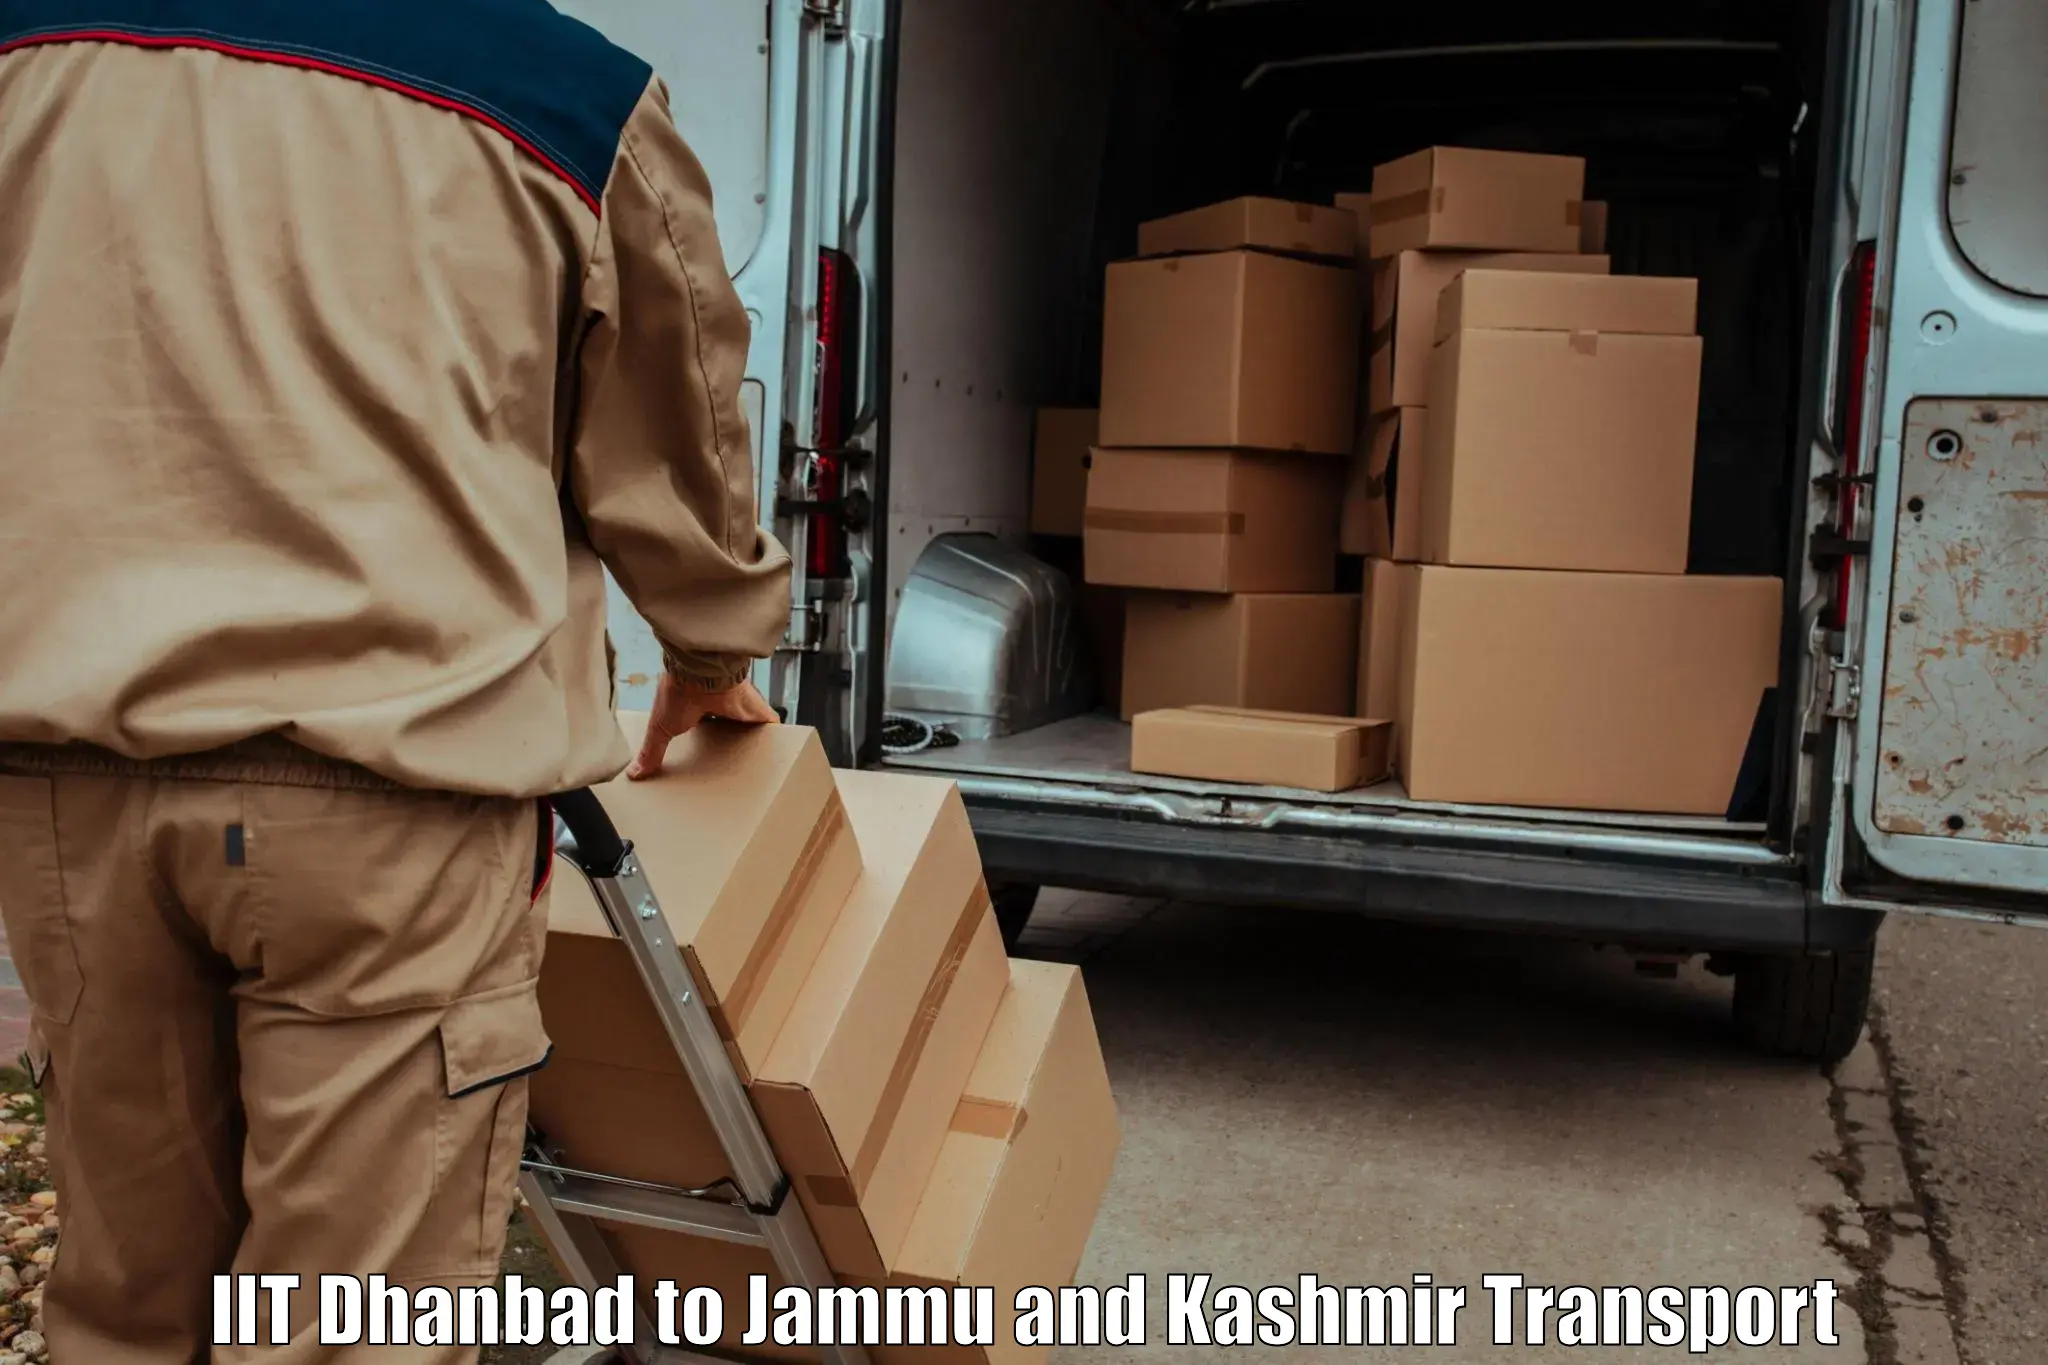 Luggage transport services in IIT Dhanbad to Jammu and Kashmir